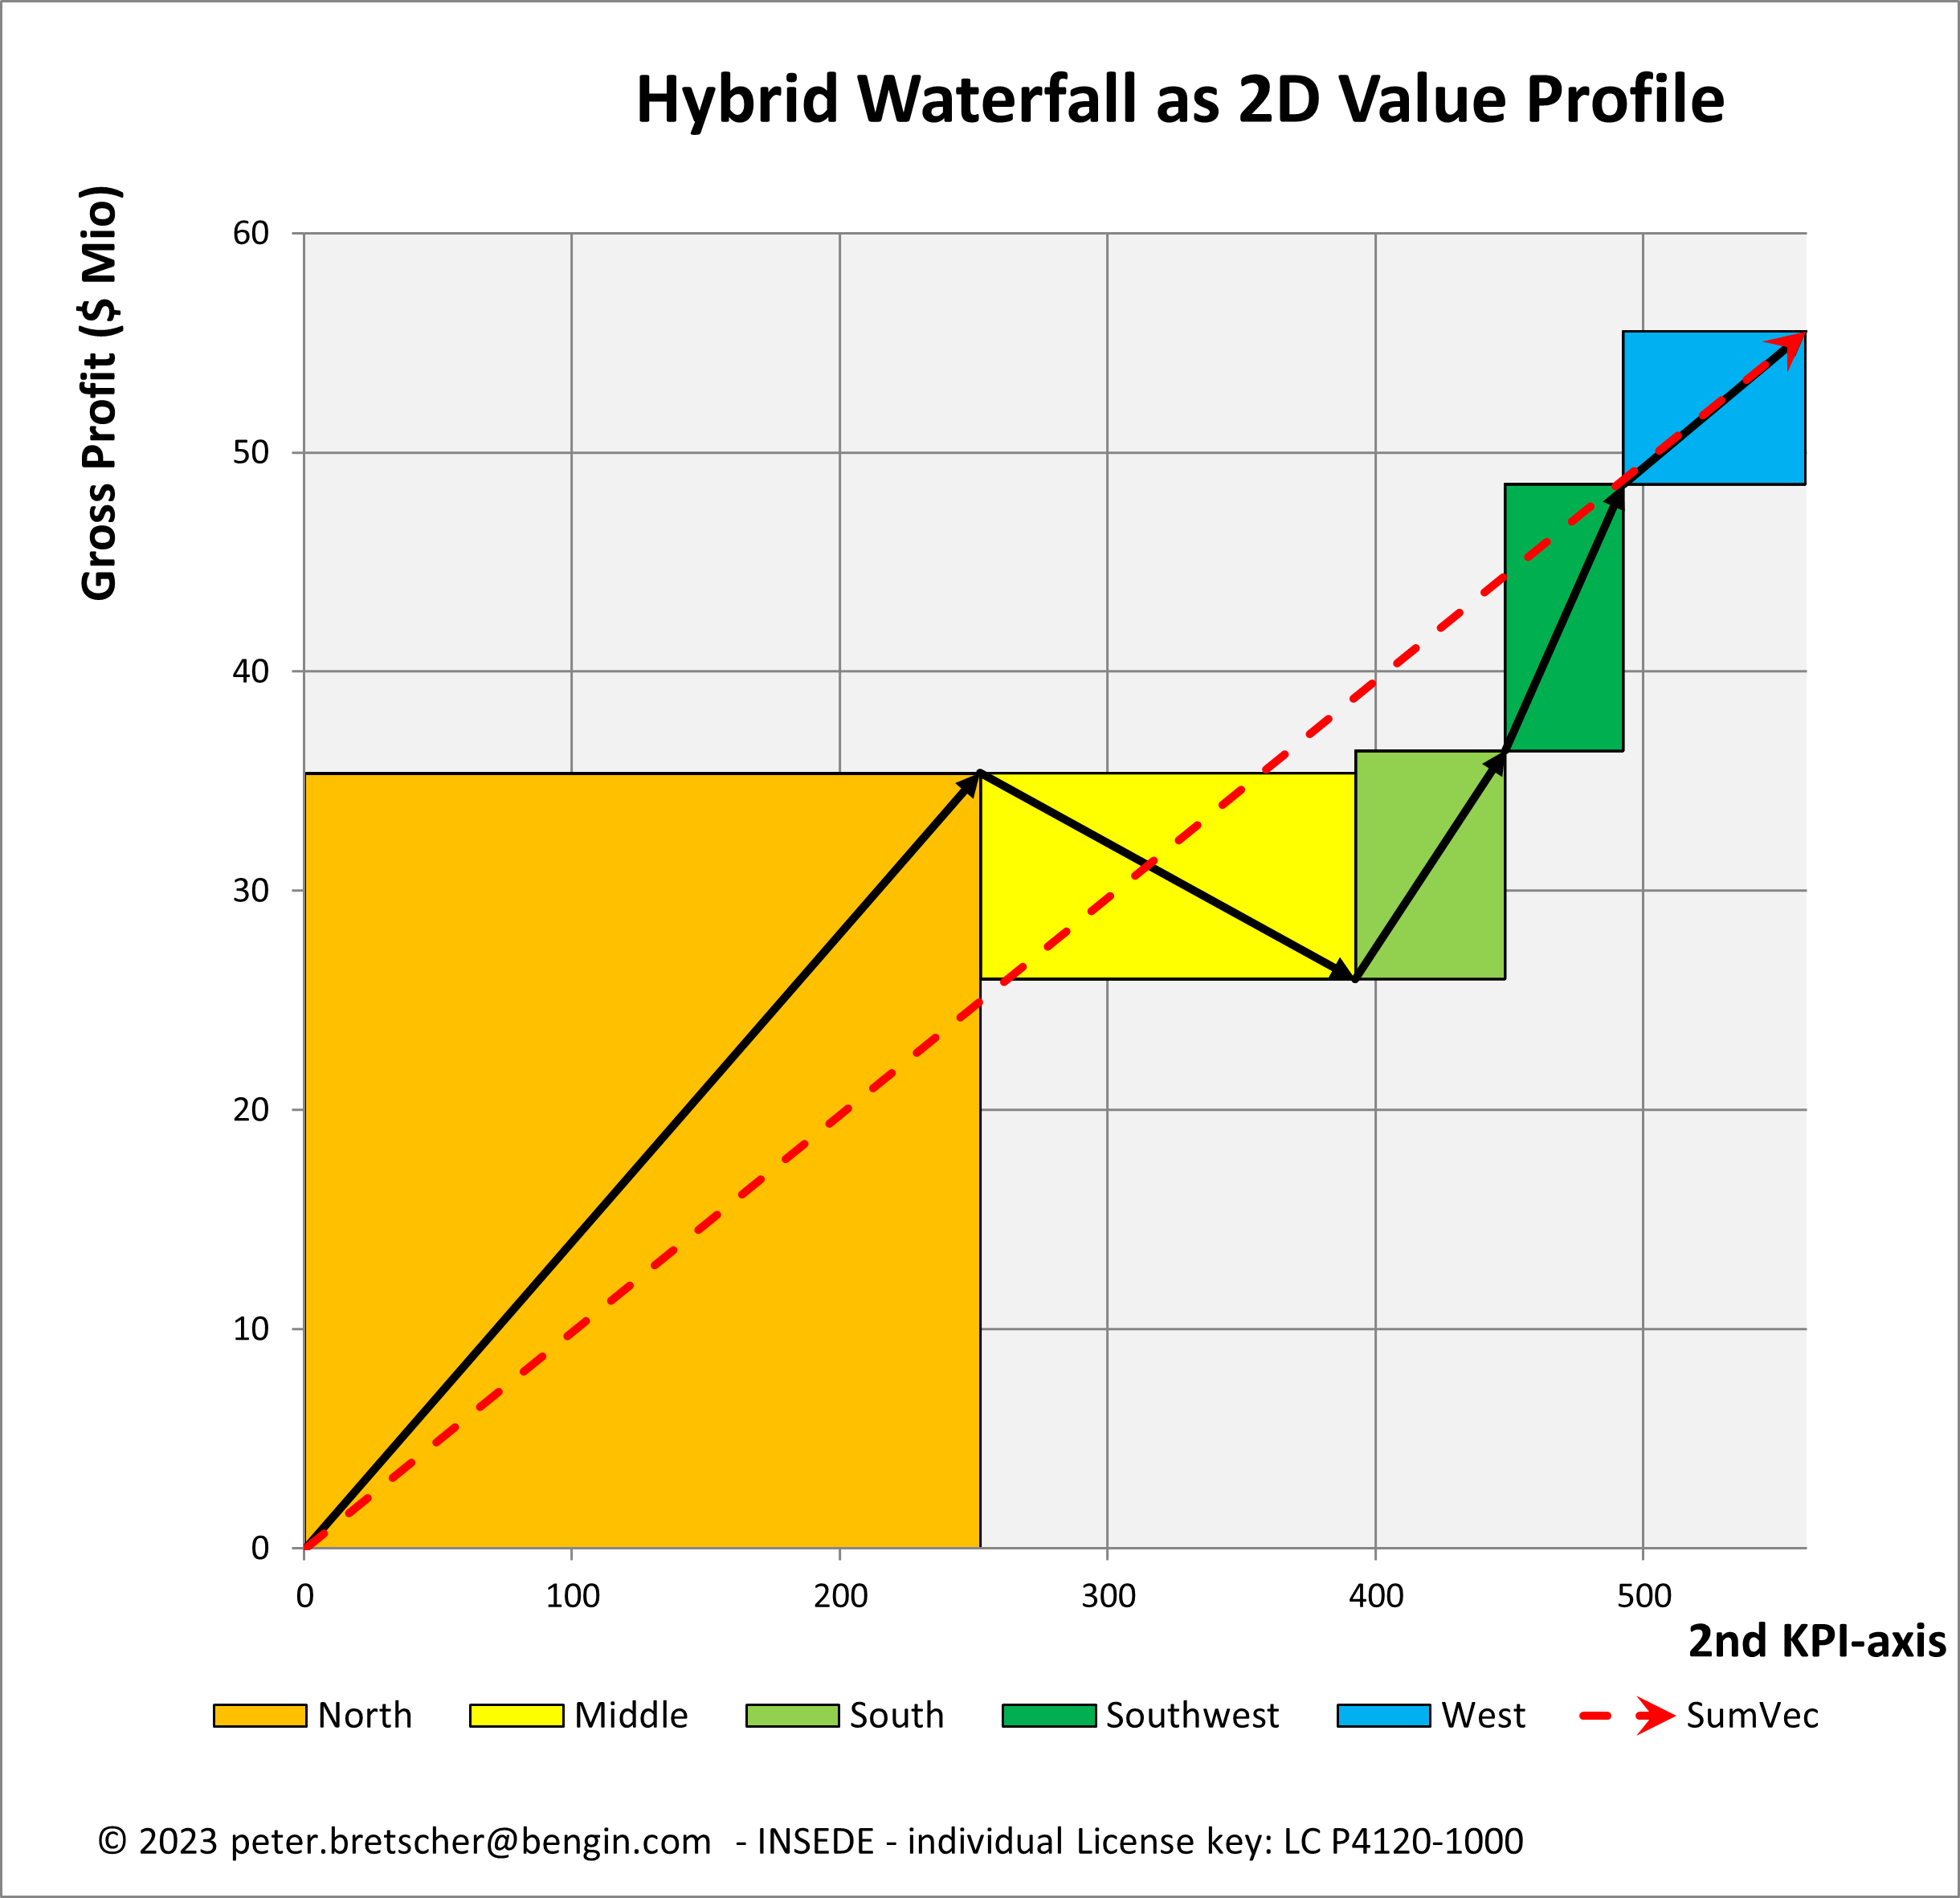 Hybrid Waterfall as 2D Value Profile